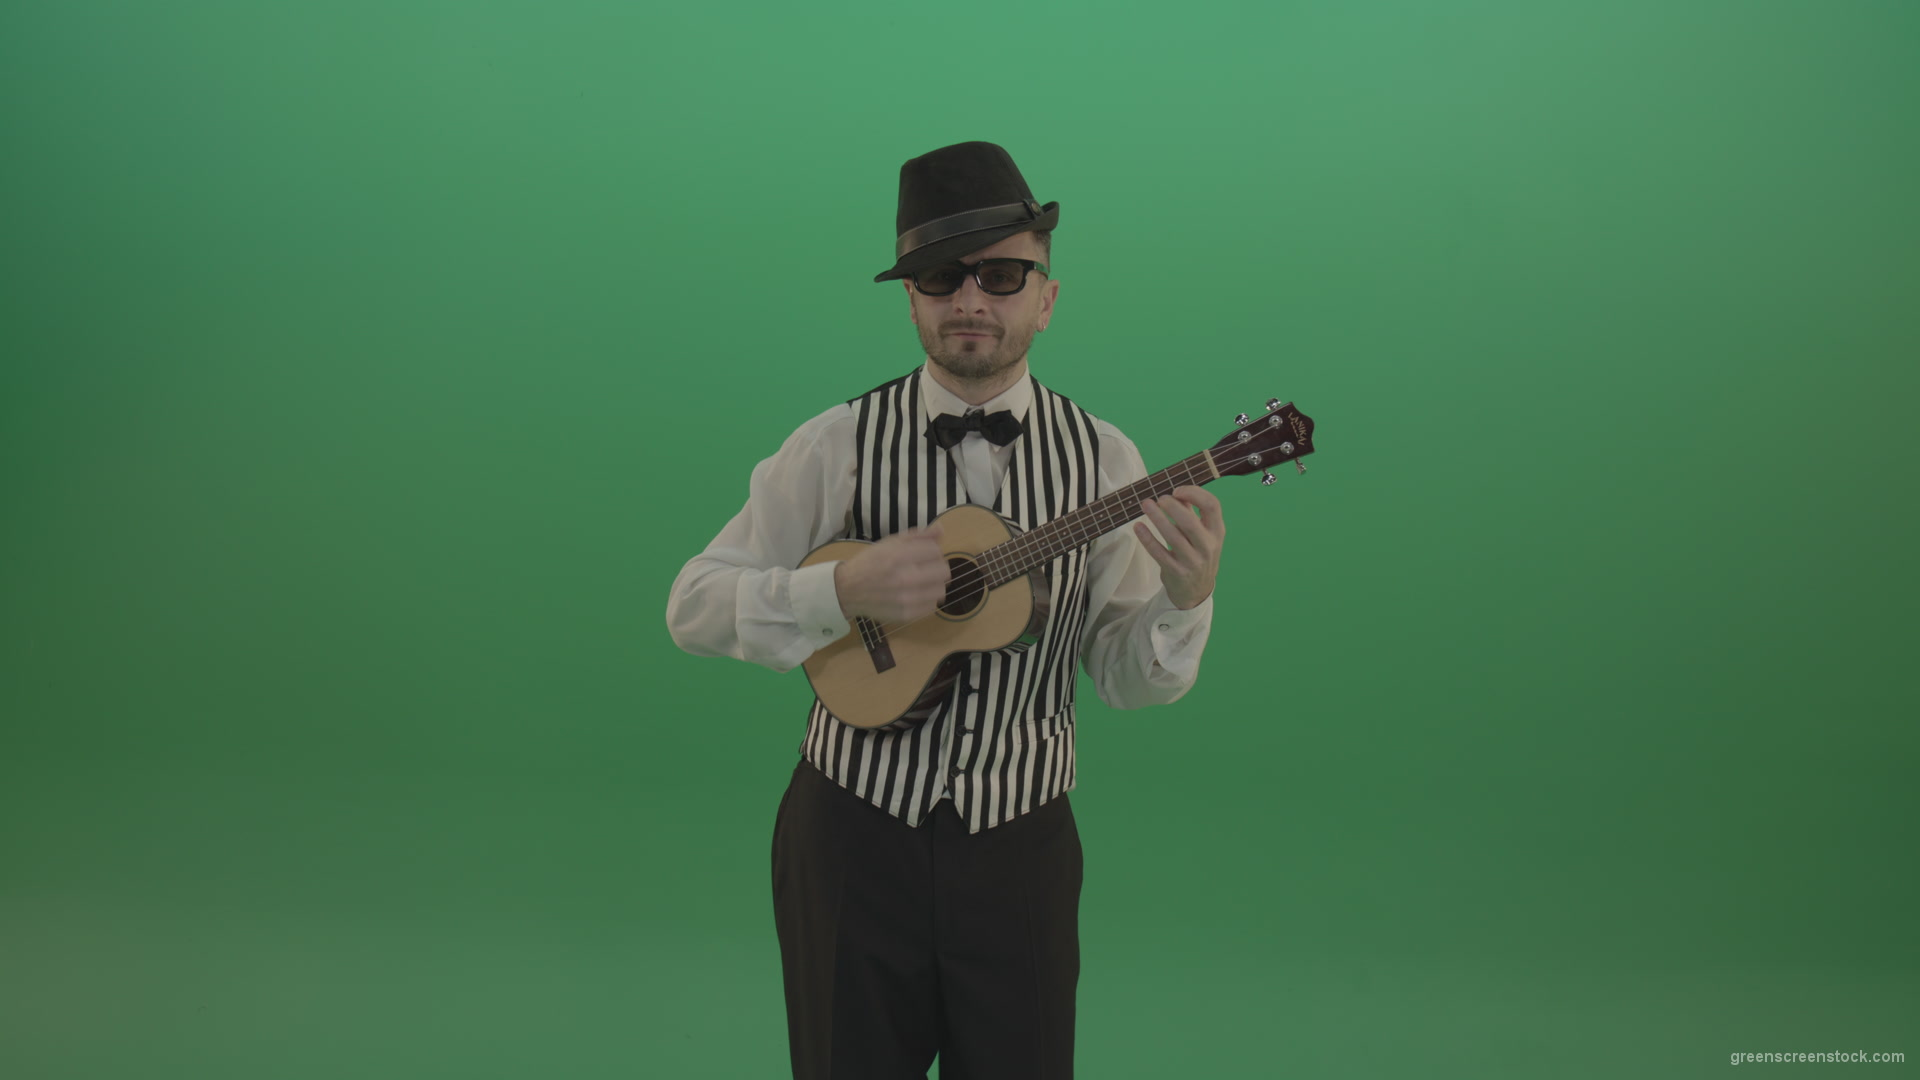 Funny-guitar-player-with-small-classic-guitar-on-chromakey-green-screen_002 Green Screen Stock